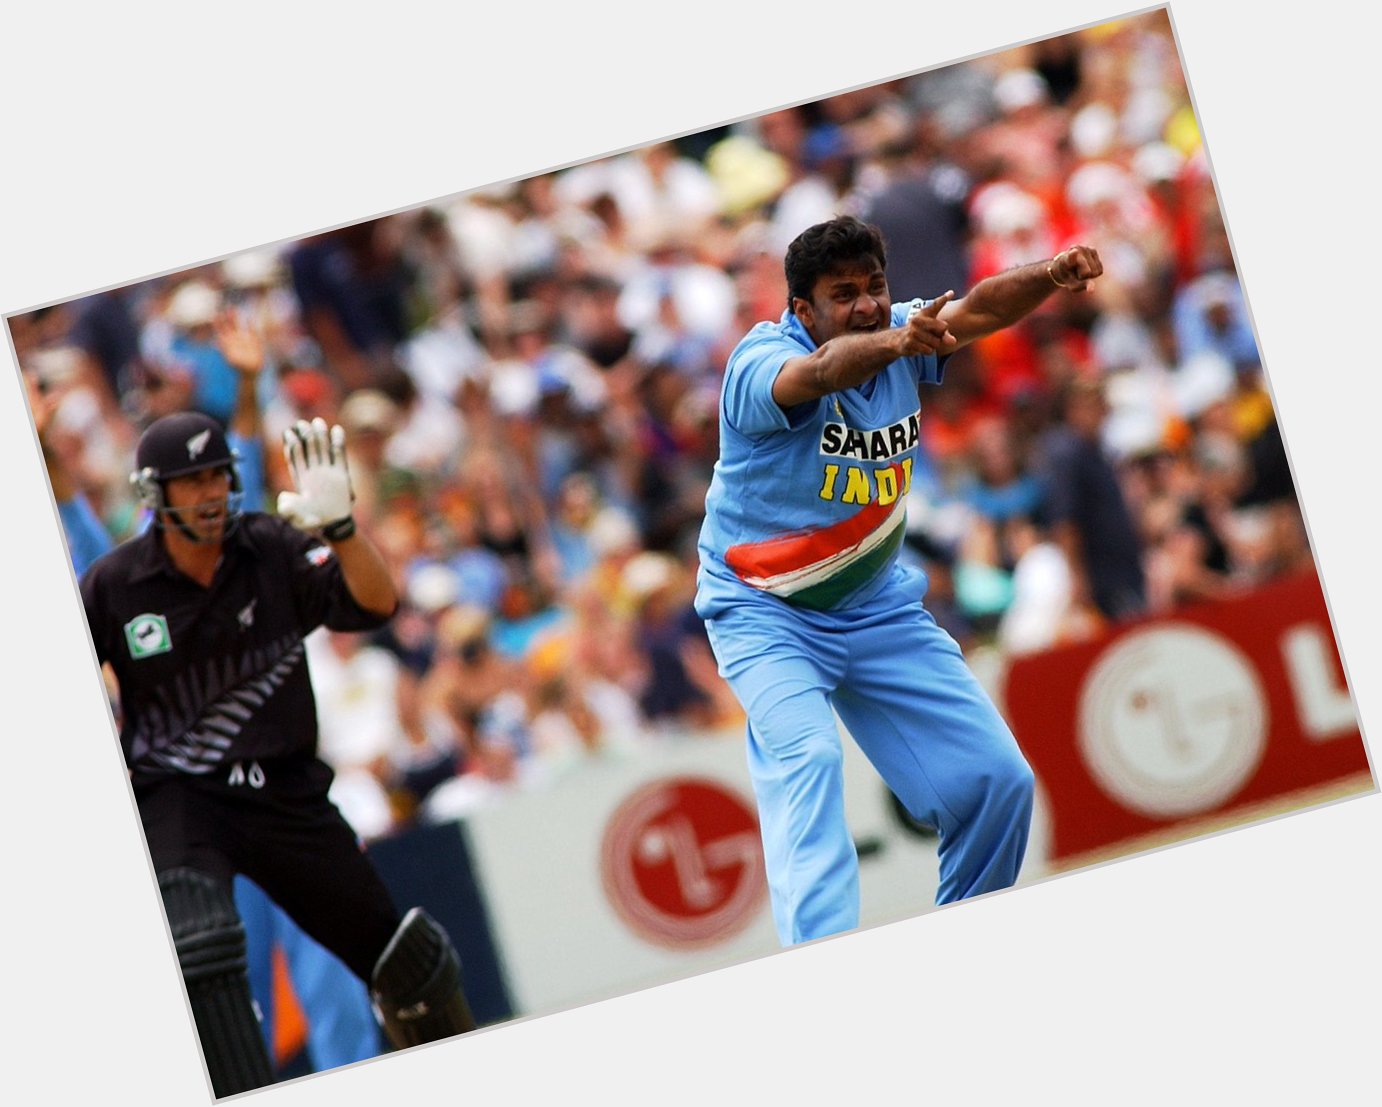 Happy Birthday to Javagal Srinath! Finest and the most underrated pace bowler with 236 Test and 315 ODI scalps. 